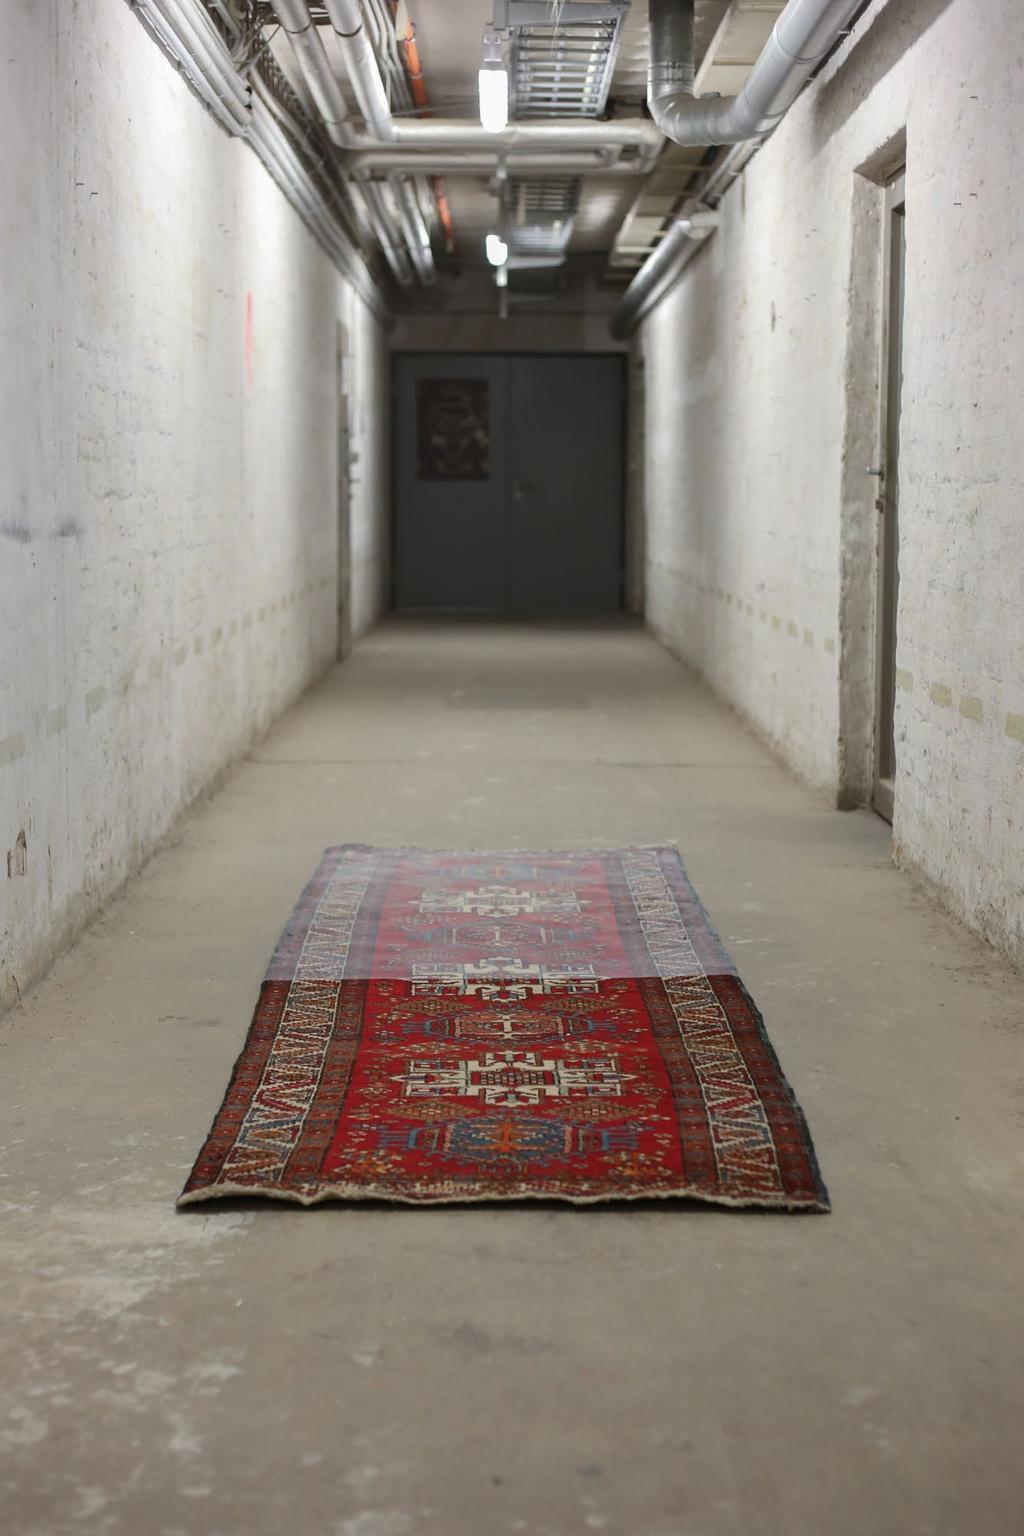 ORIENTAL RUG installation (3,5 x 1 m) varnish DAVID MERAN 2015 Carpets have the power of defining room. They create an invisible space just by being rolled out.